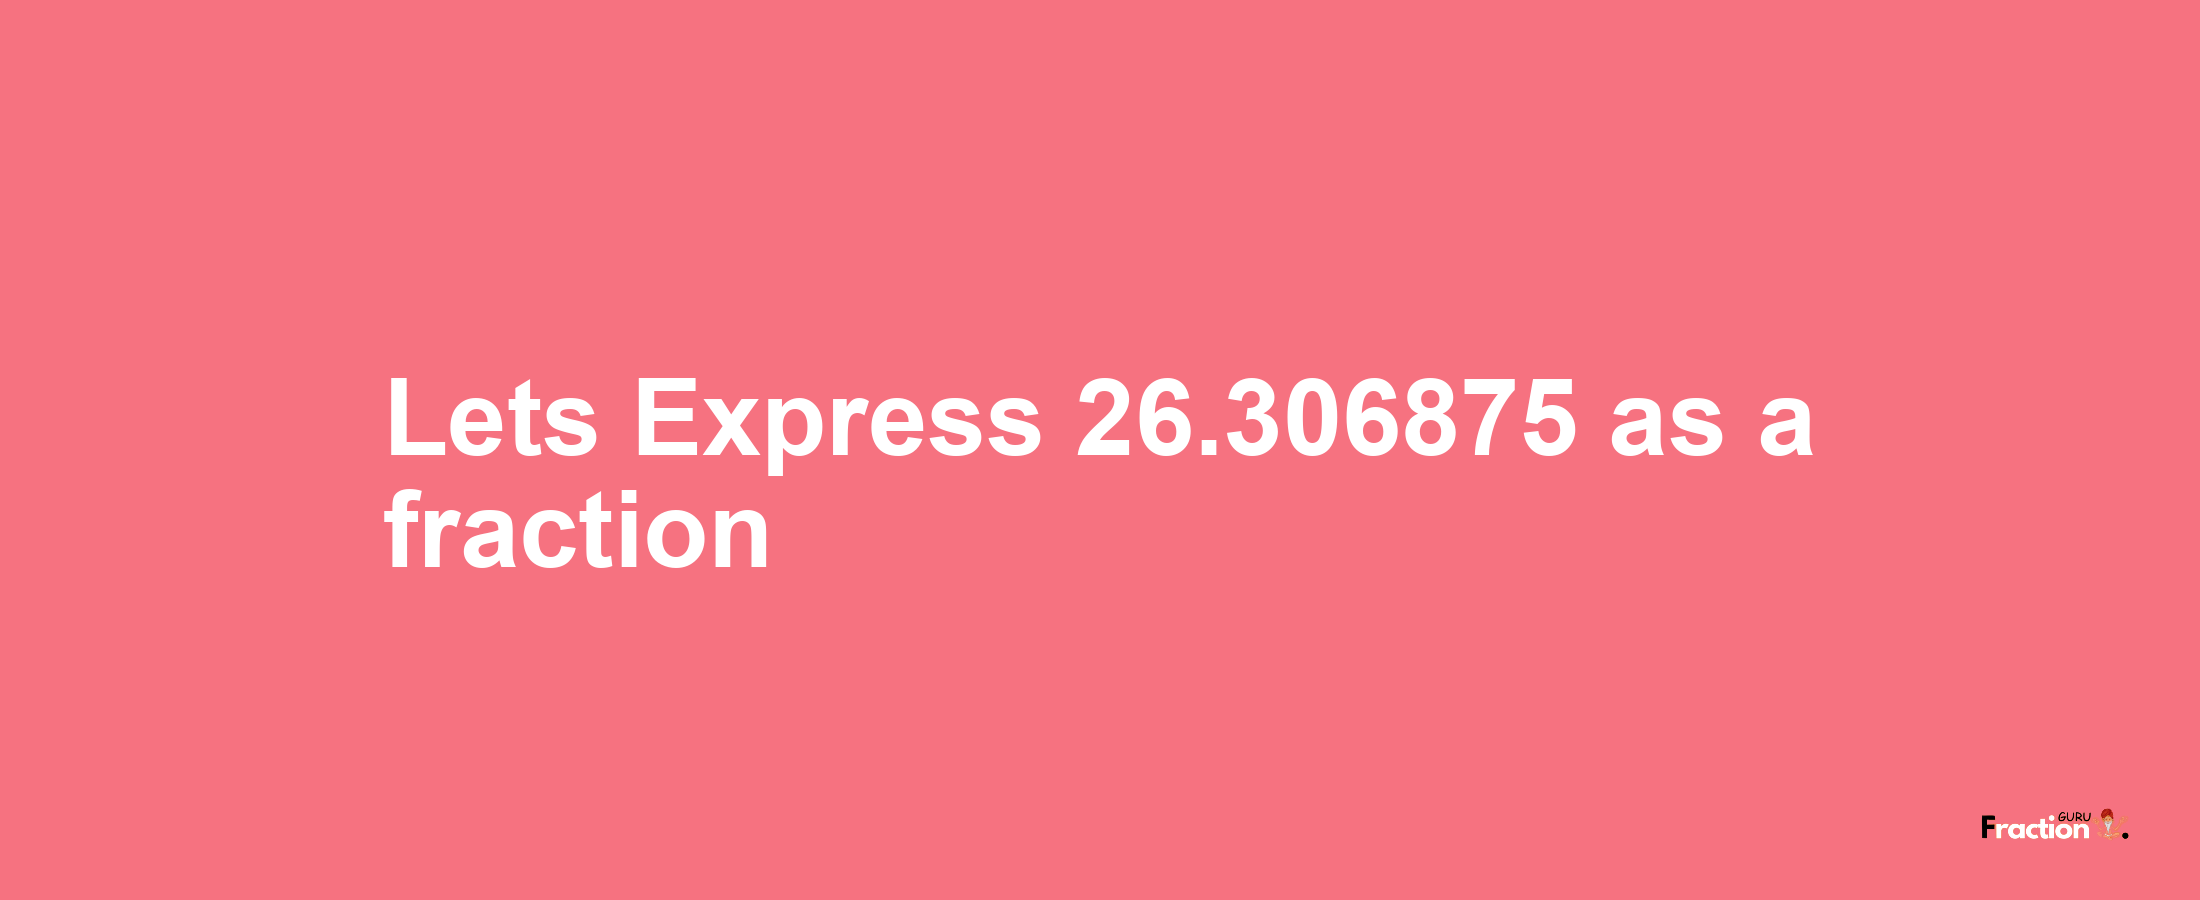 Lets Express 26.306875 as afraction